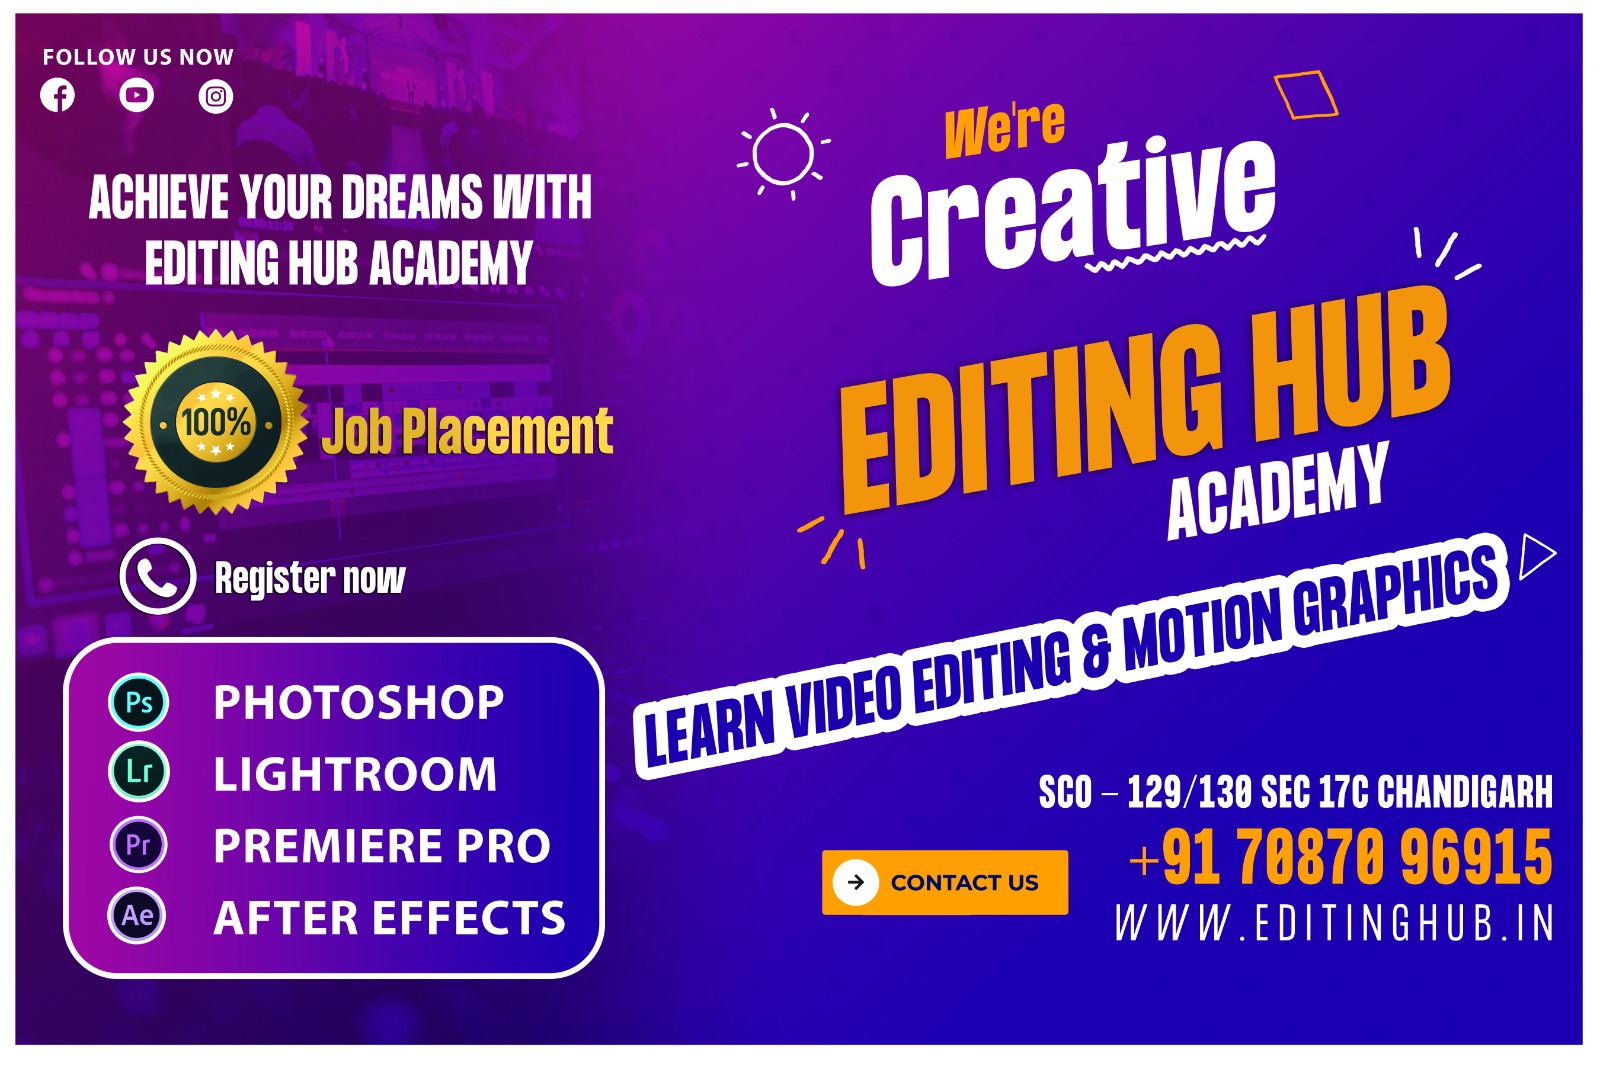 What you will Learn Video Editing Training Syllabus - GET FREE SOFTWARES WITH OUR VIDEO EDITING COURSES IN CHANDIGARH  | Editing Hub Academy | Video Editing course in Chandigarh, best Video Editing course in Chandigarh, top Video Editing course in Chandigarh, Video Editing academy in Chandigarh - GL111776